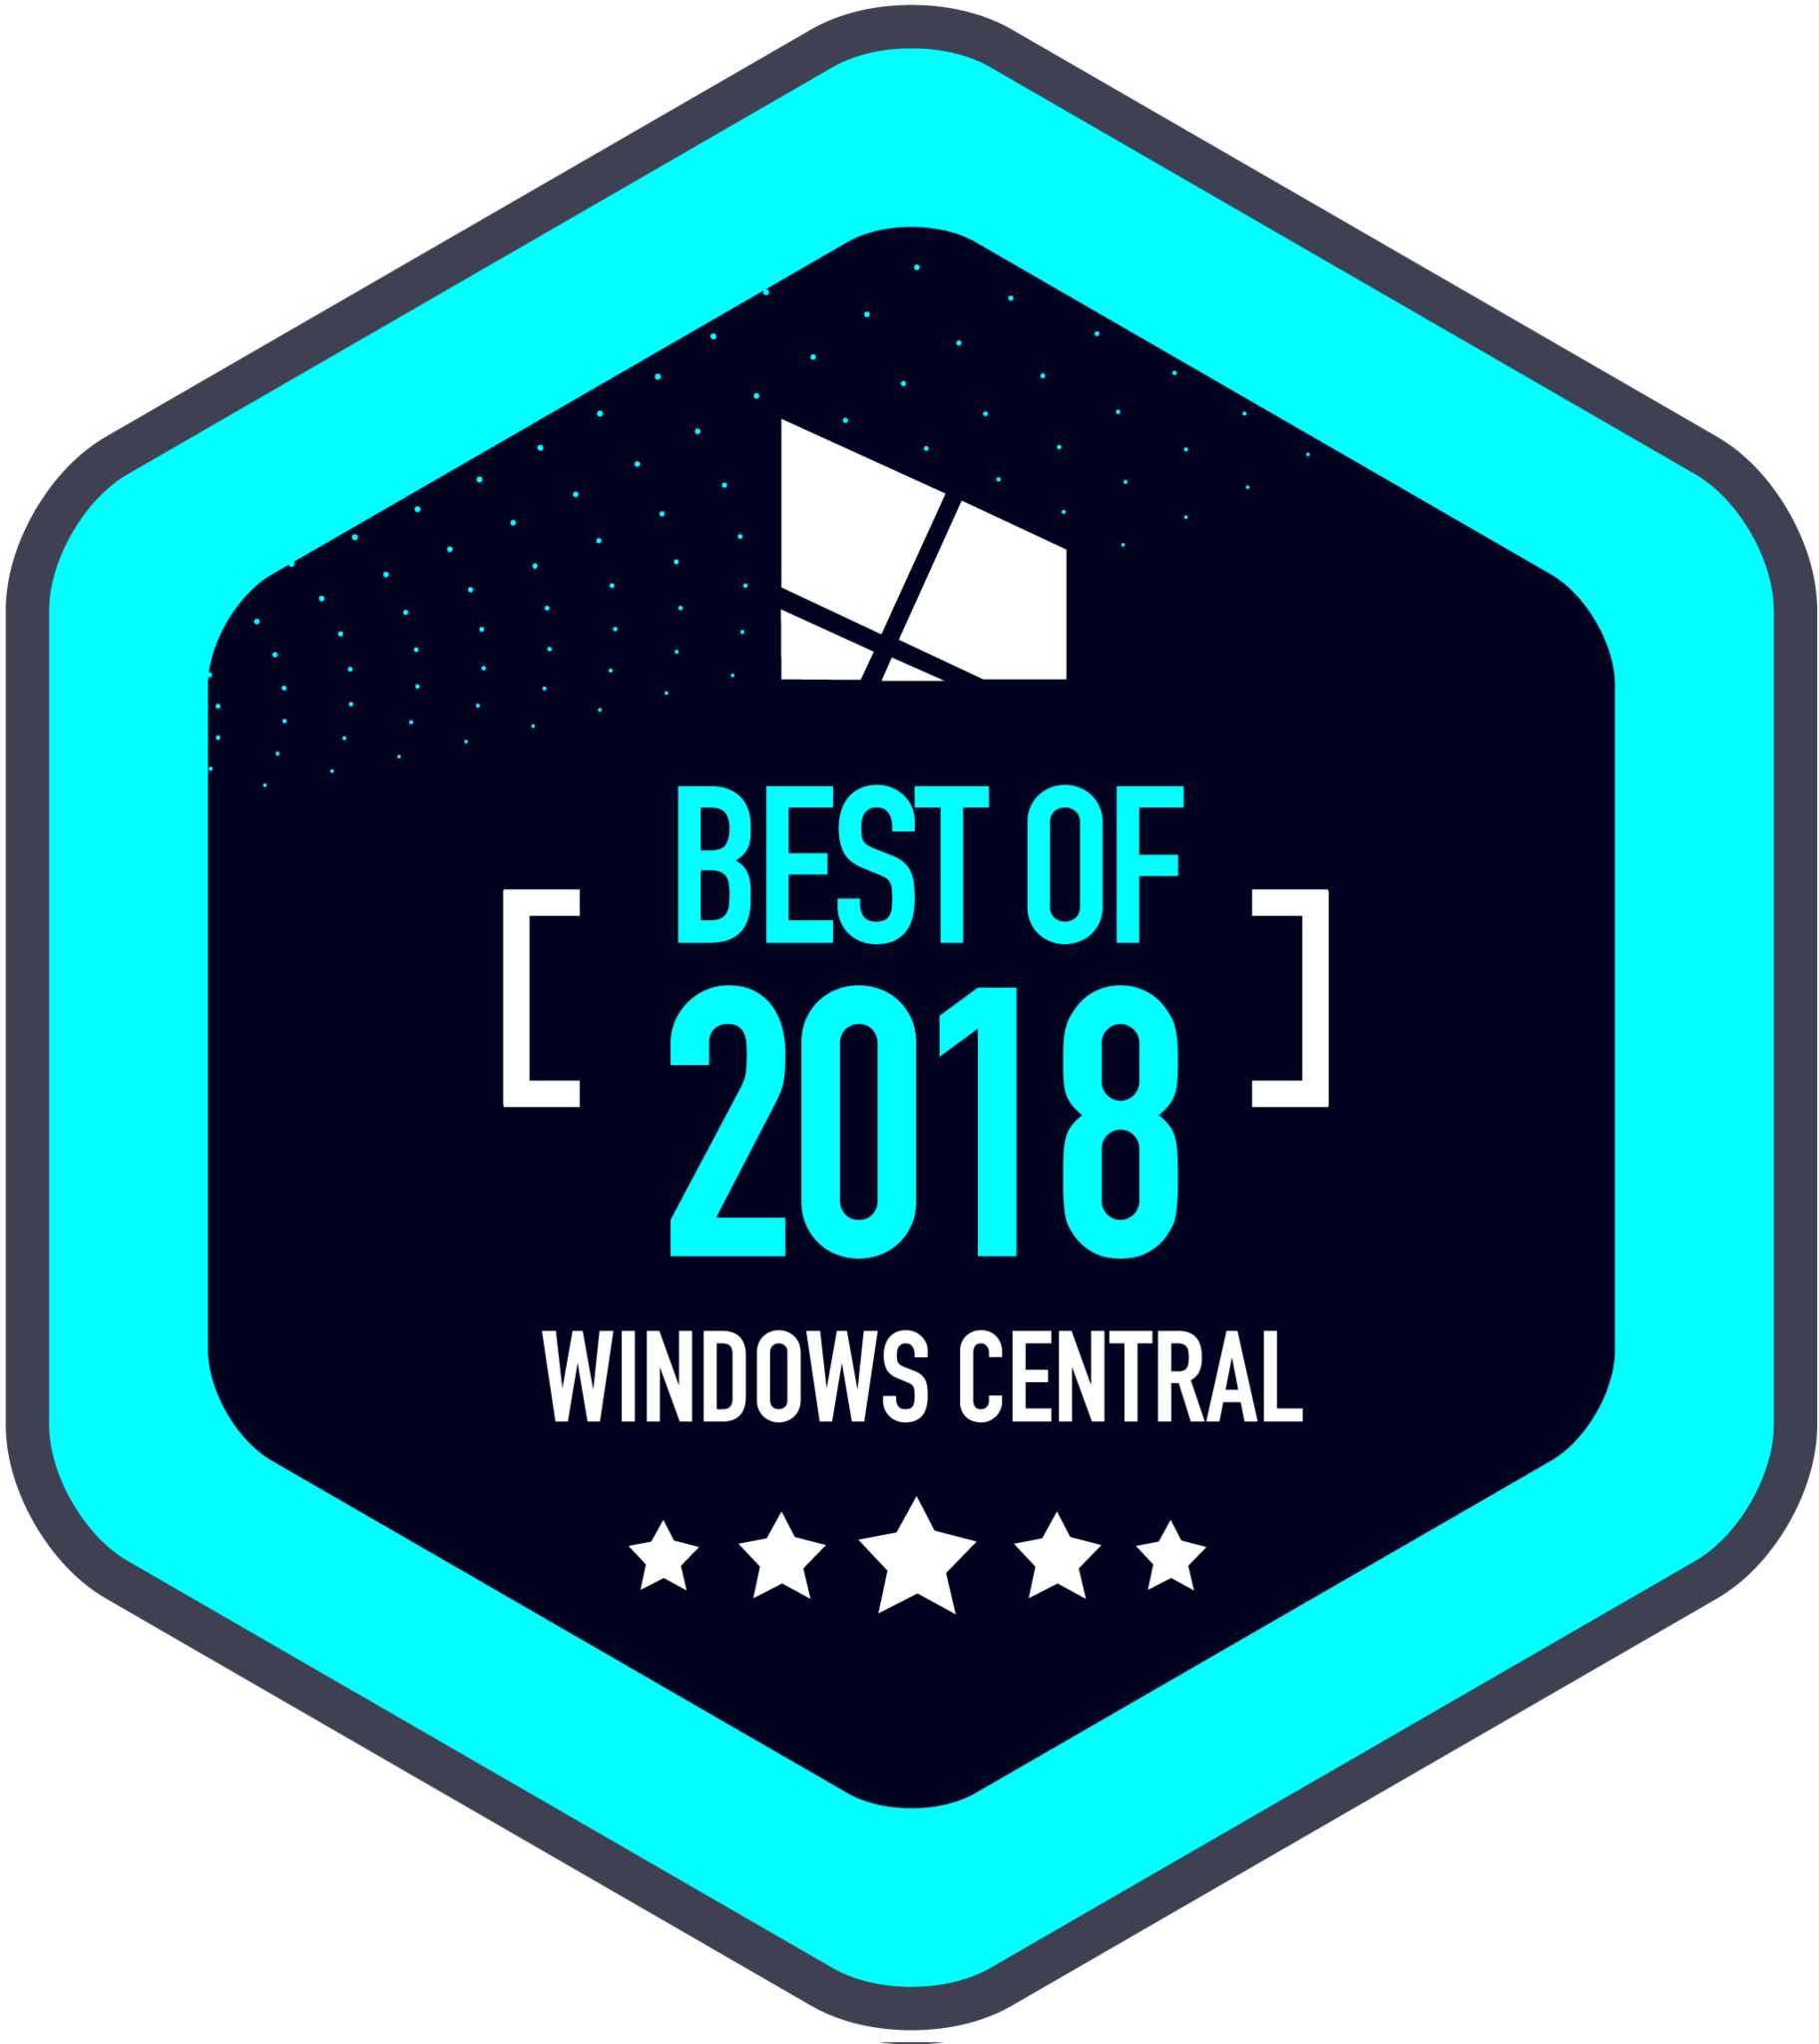 Windows Central Best Of 2018 The Years Best Windows 10 Apps Windows